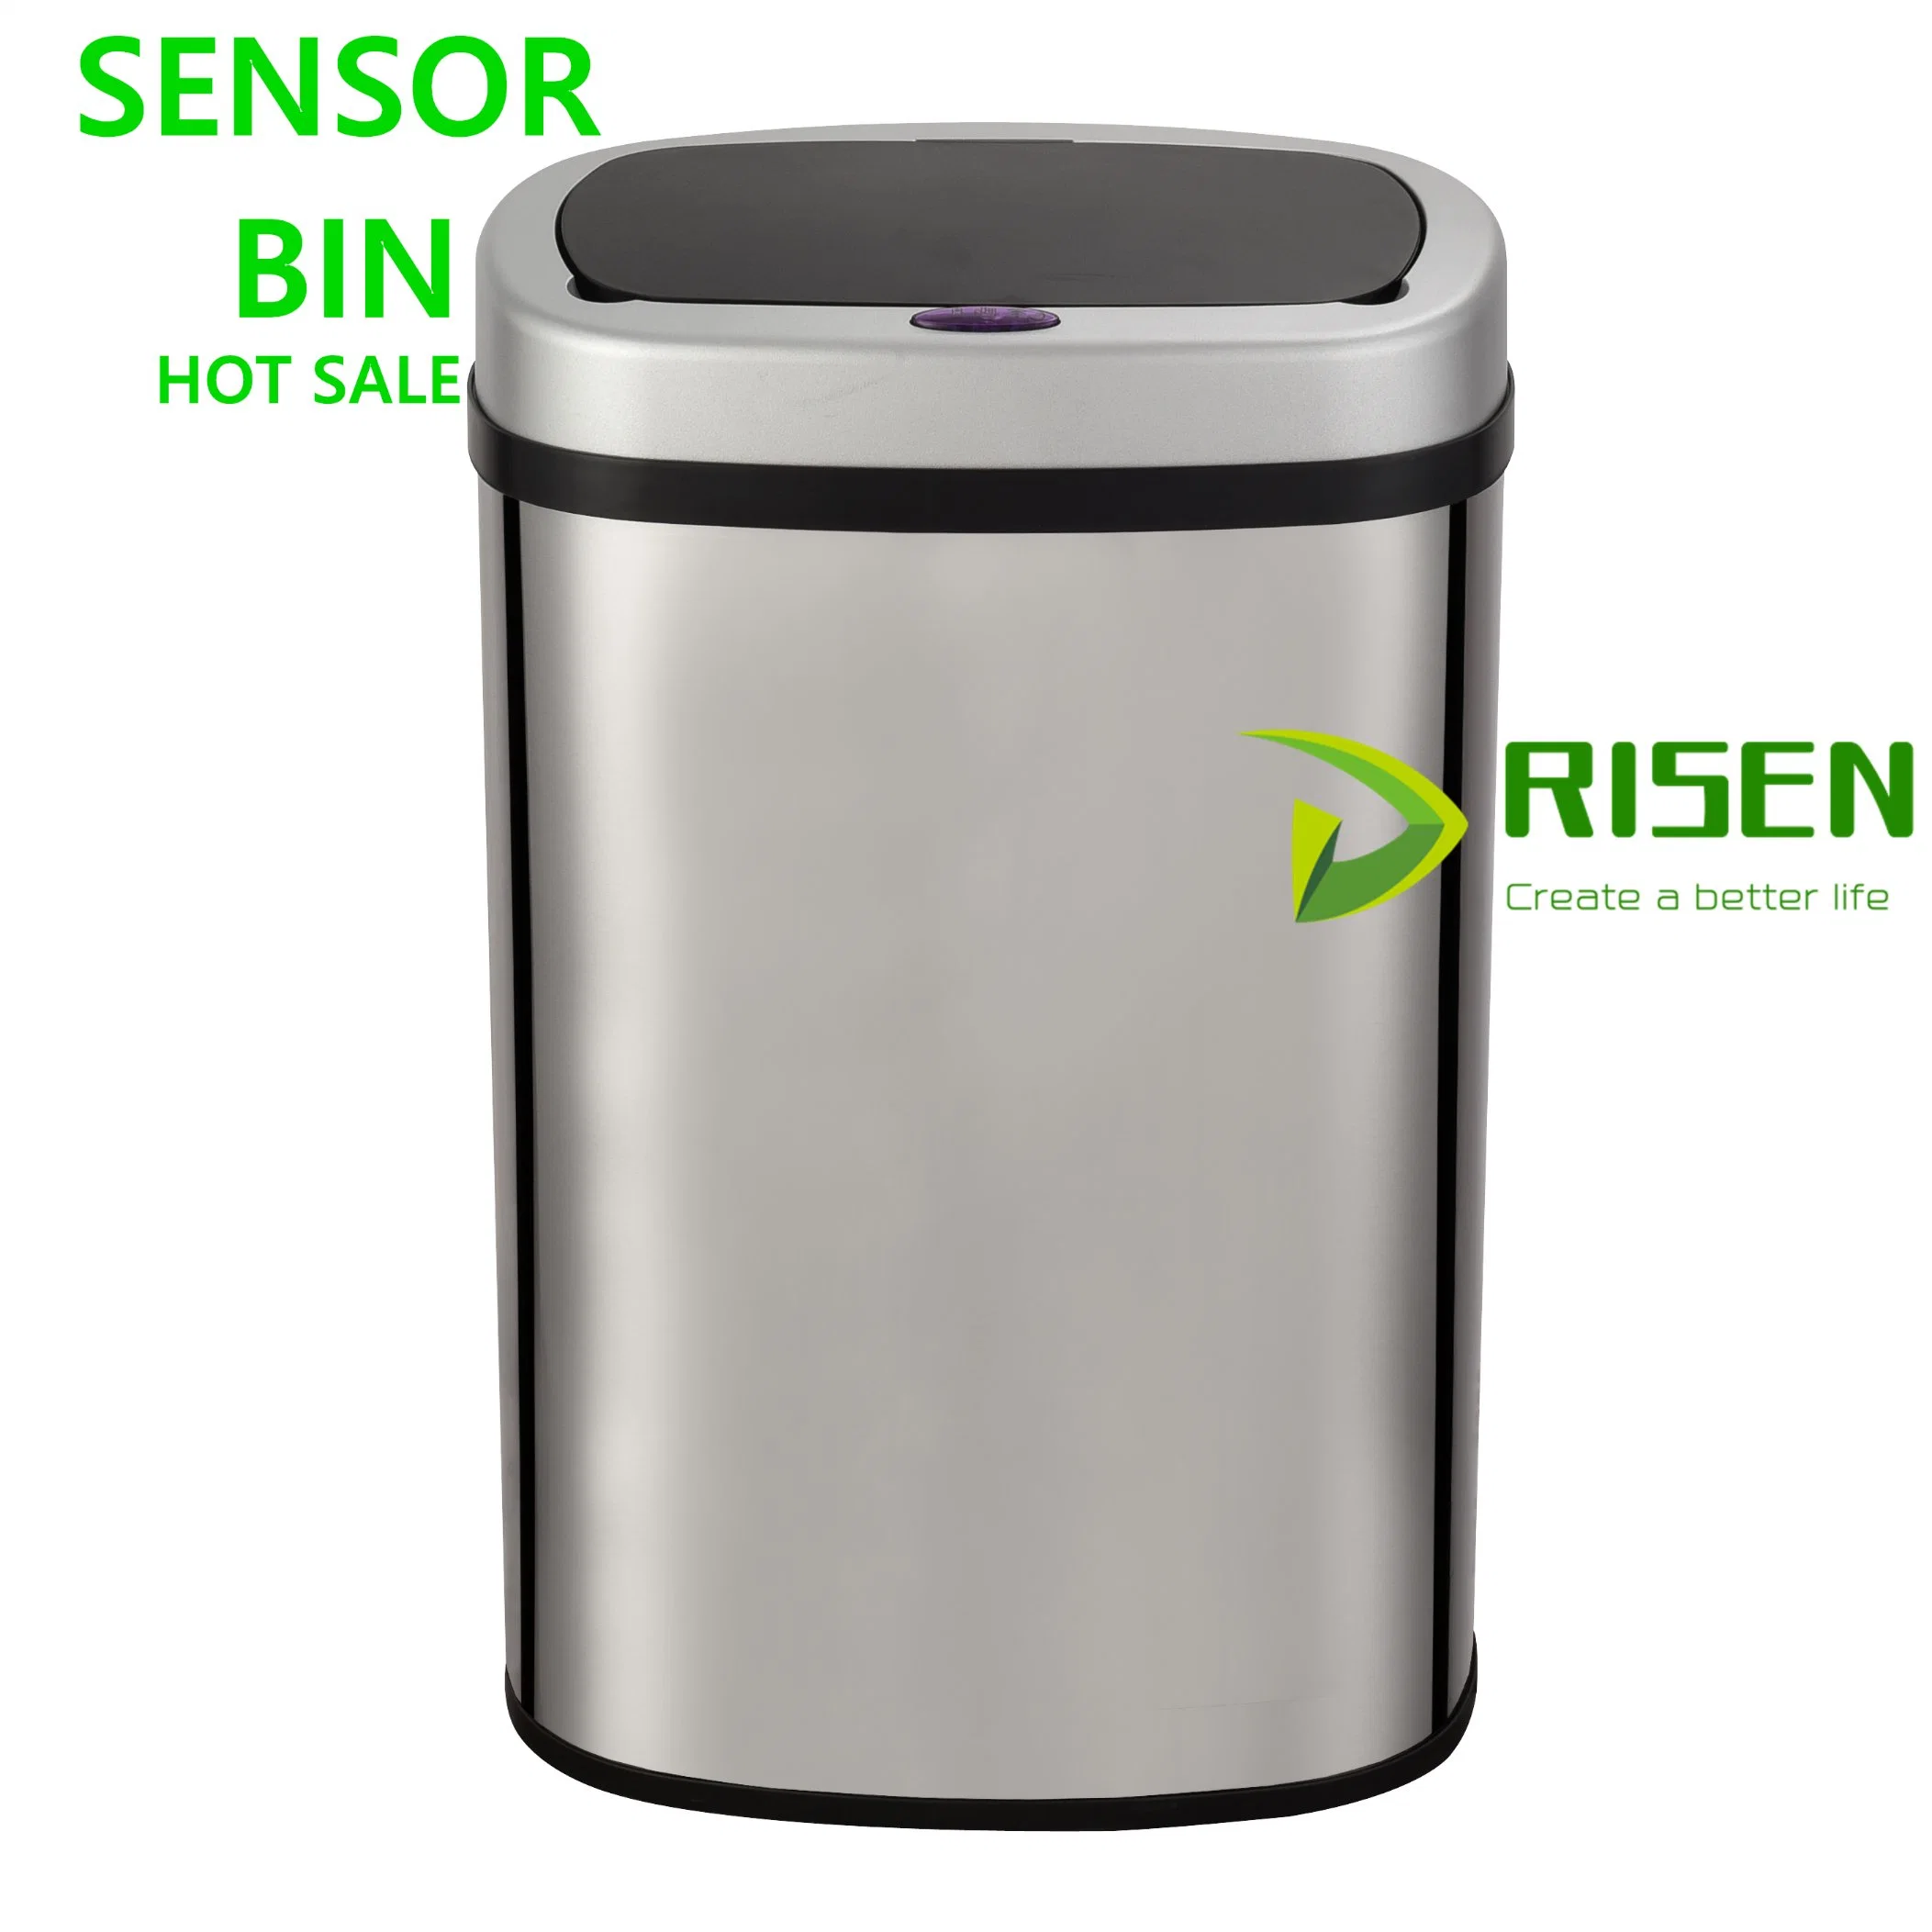 48L/58L/68L Automatic Sensor Stainless-Steel Trash Can Brushed Stainless Steel with Water Proof